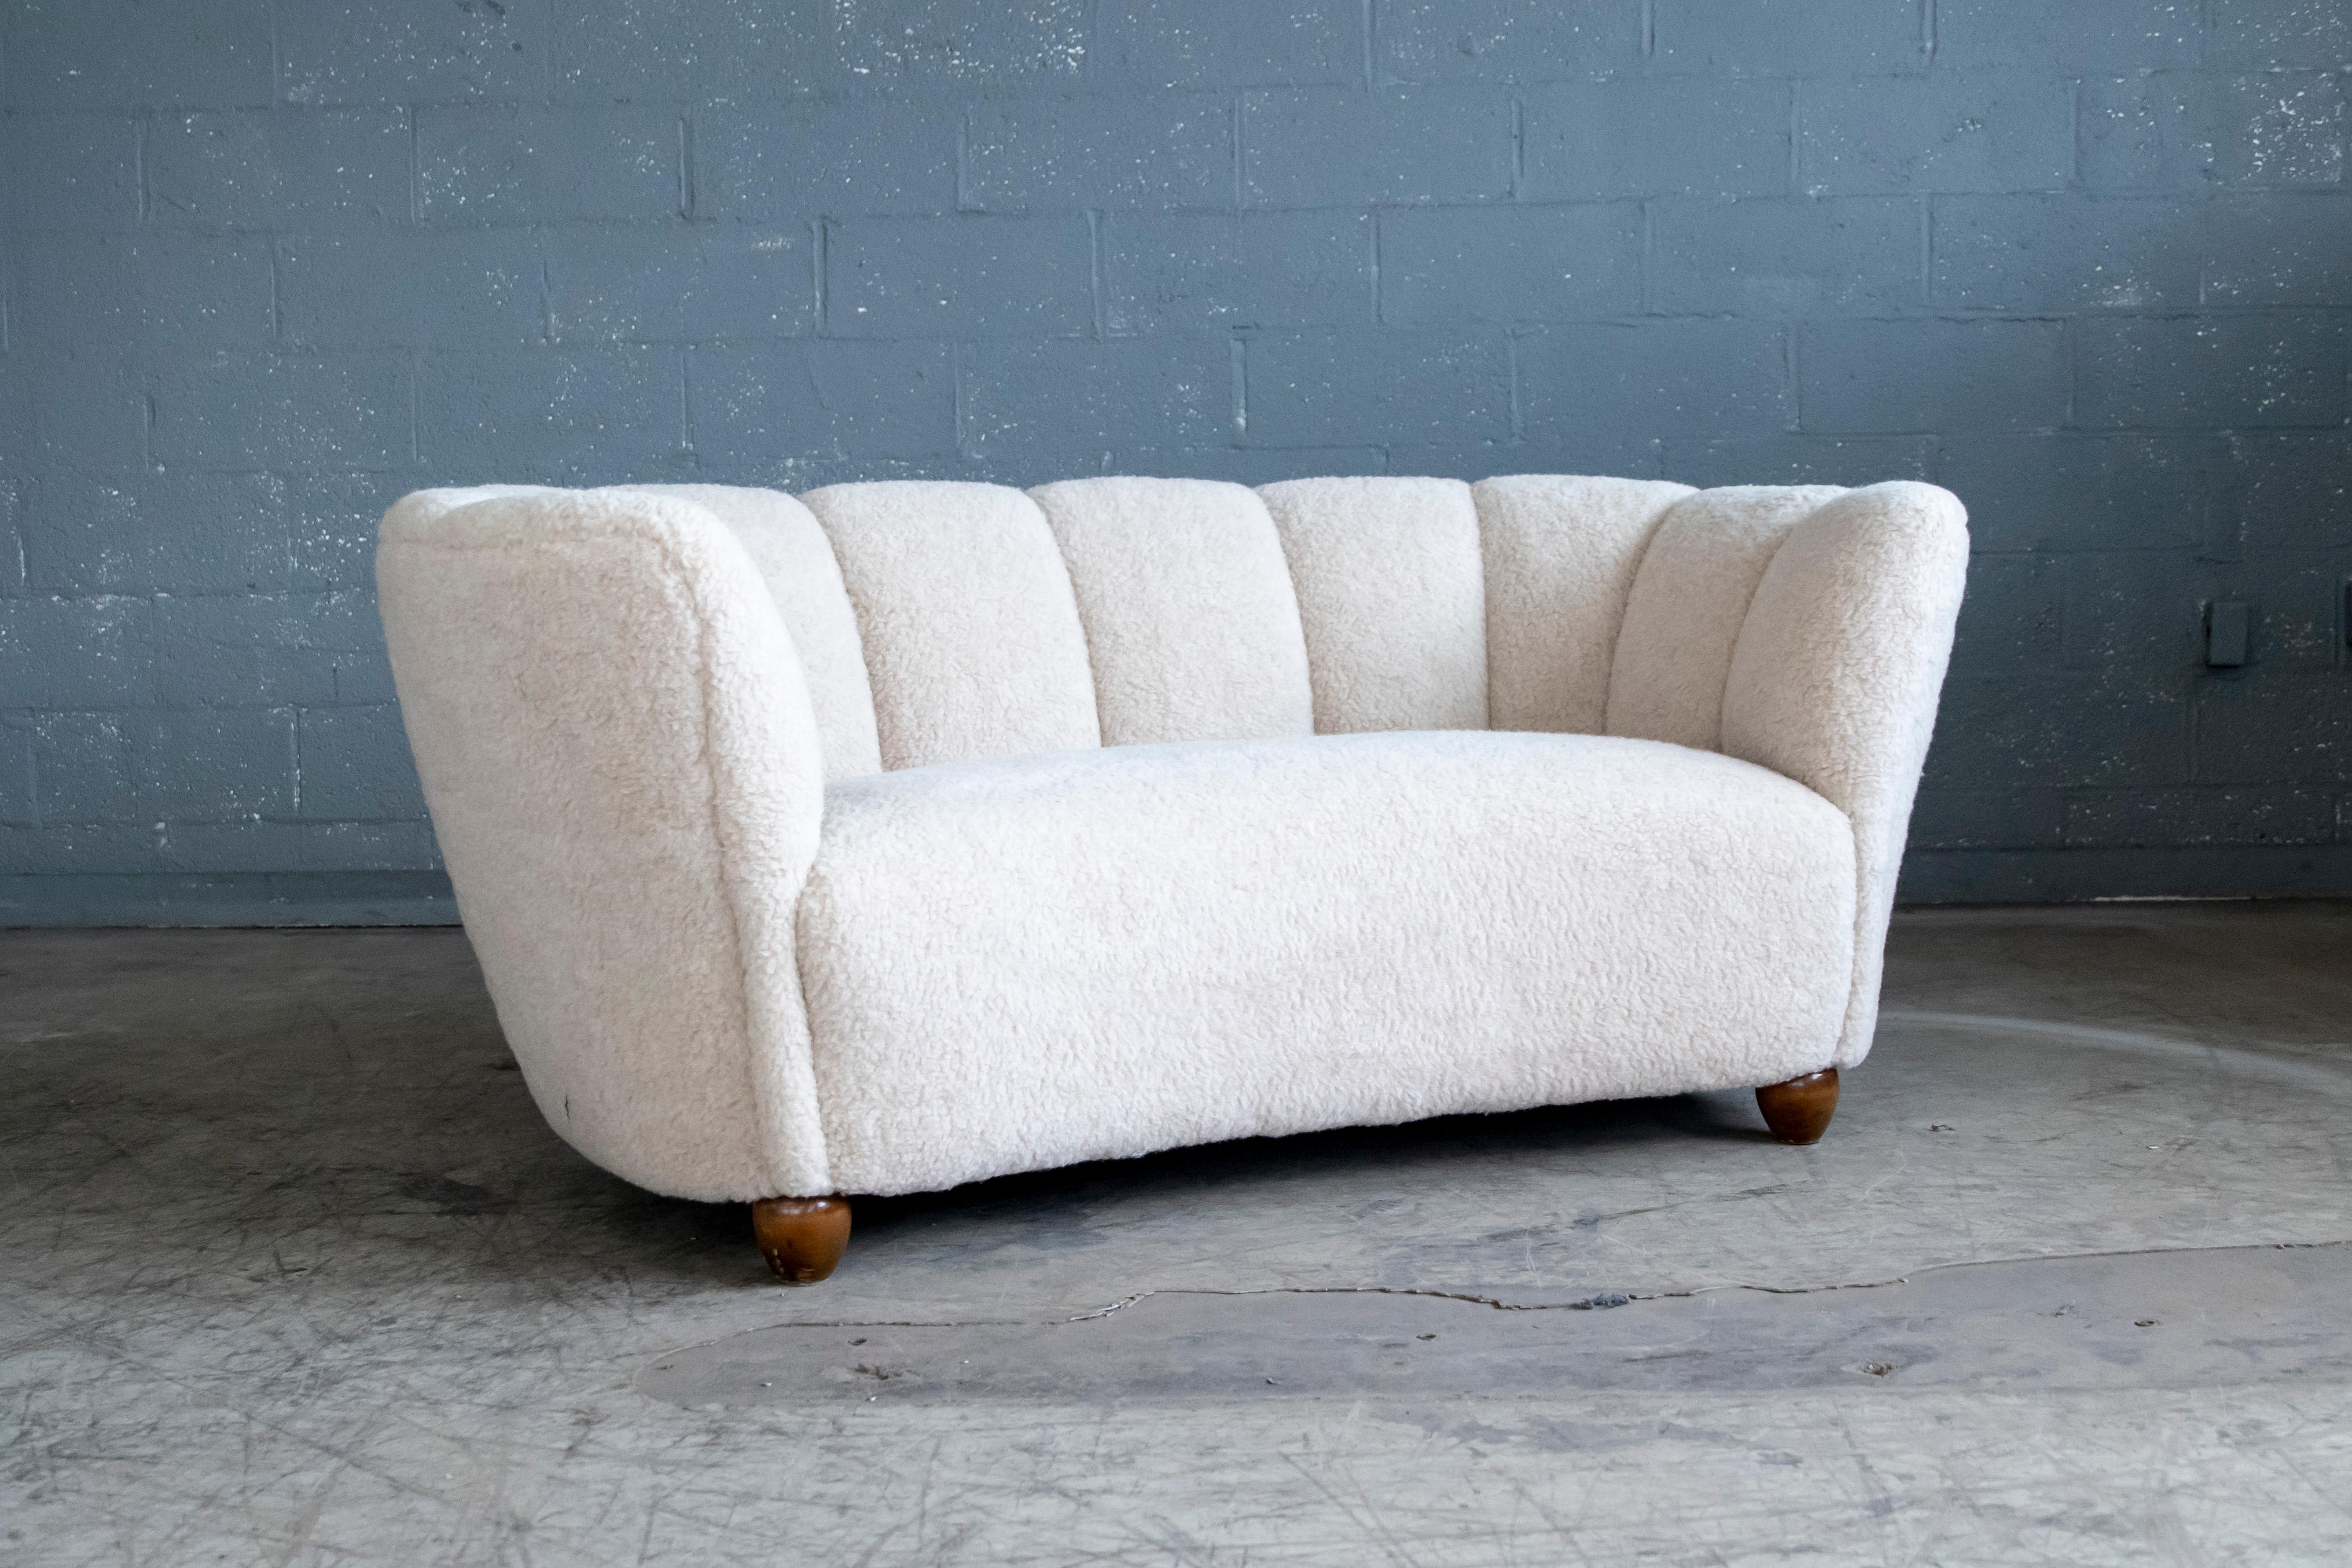 Banana shaped curved two-seat sofa or loveseat made in Denmark in the 1940s. Great statement piece. Super comfortable. Beautiful round organic lines and iconic ball feet. Fully refurbished and newly upholstered with beige Australian 100% merino